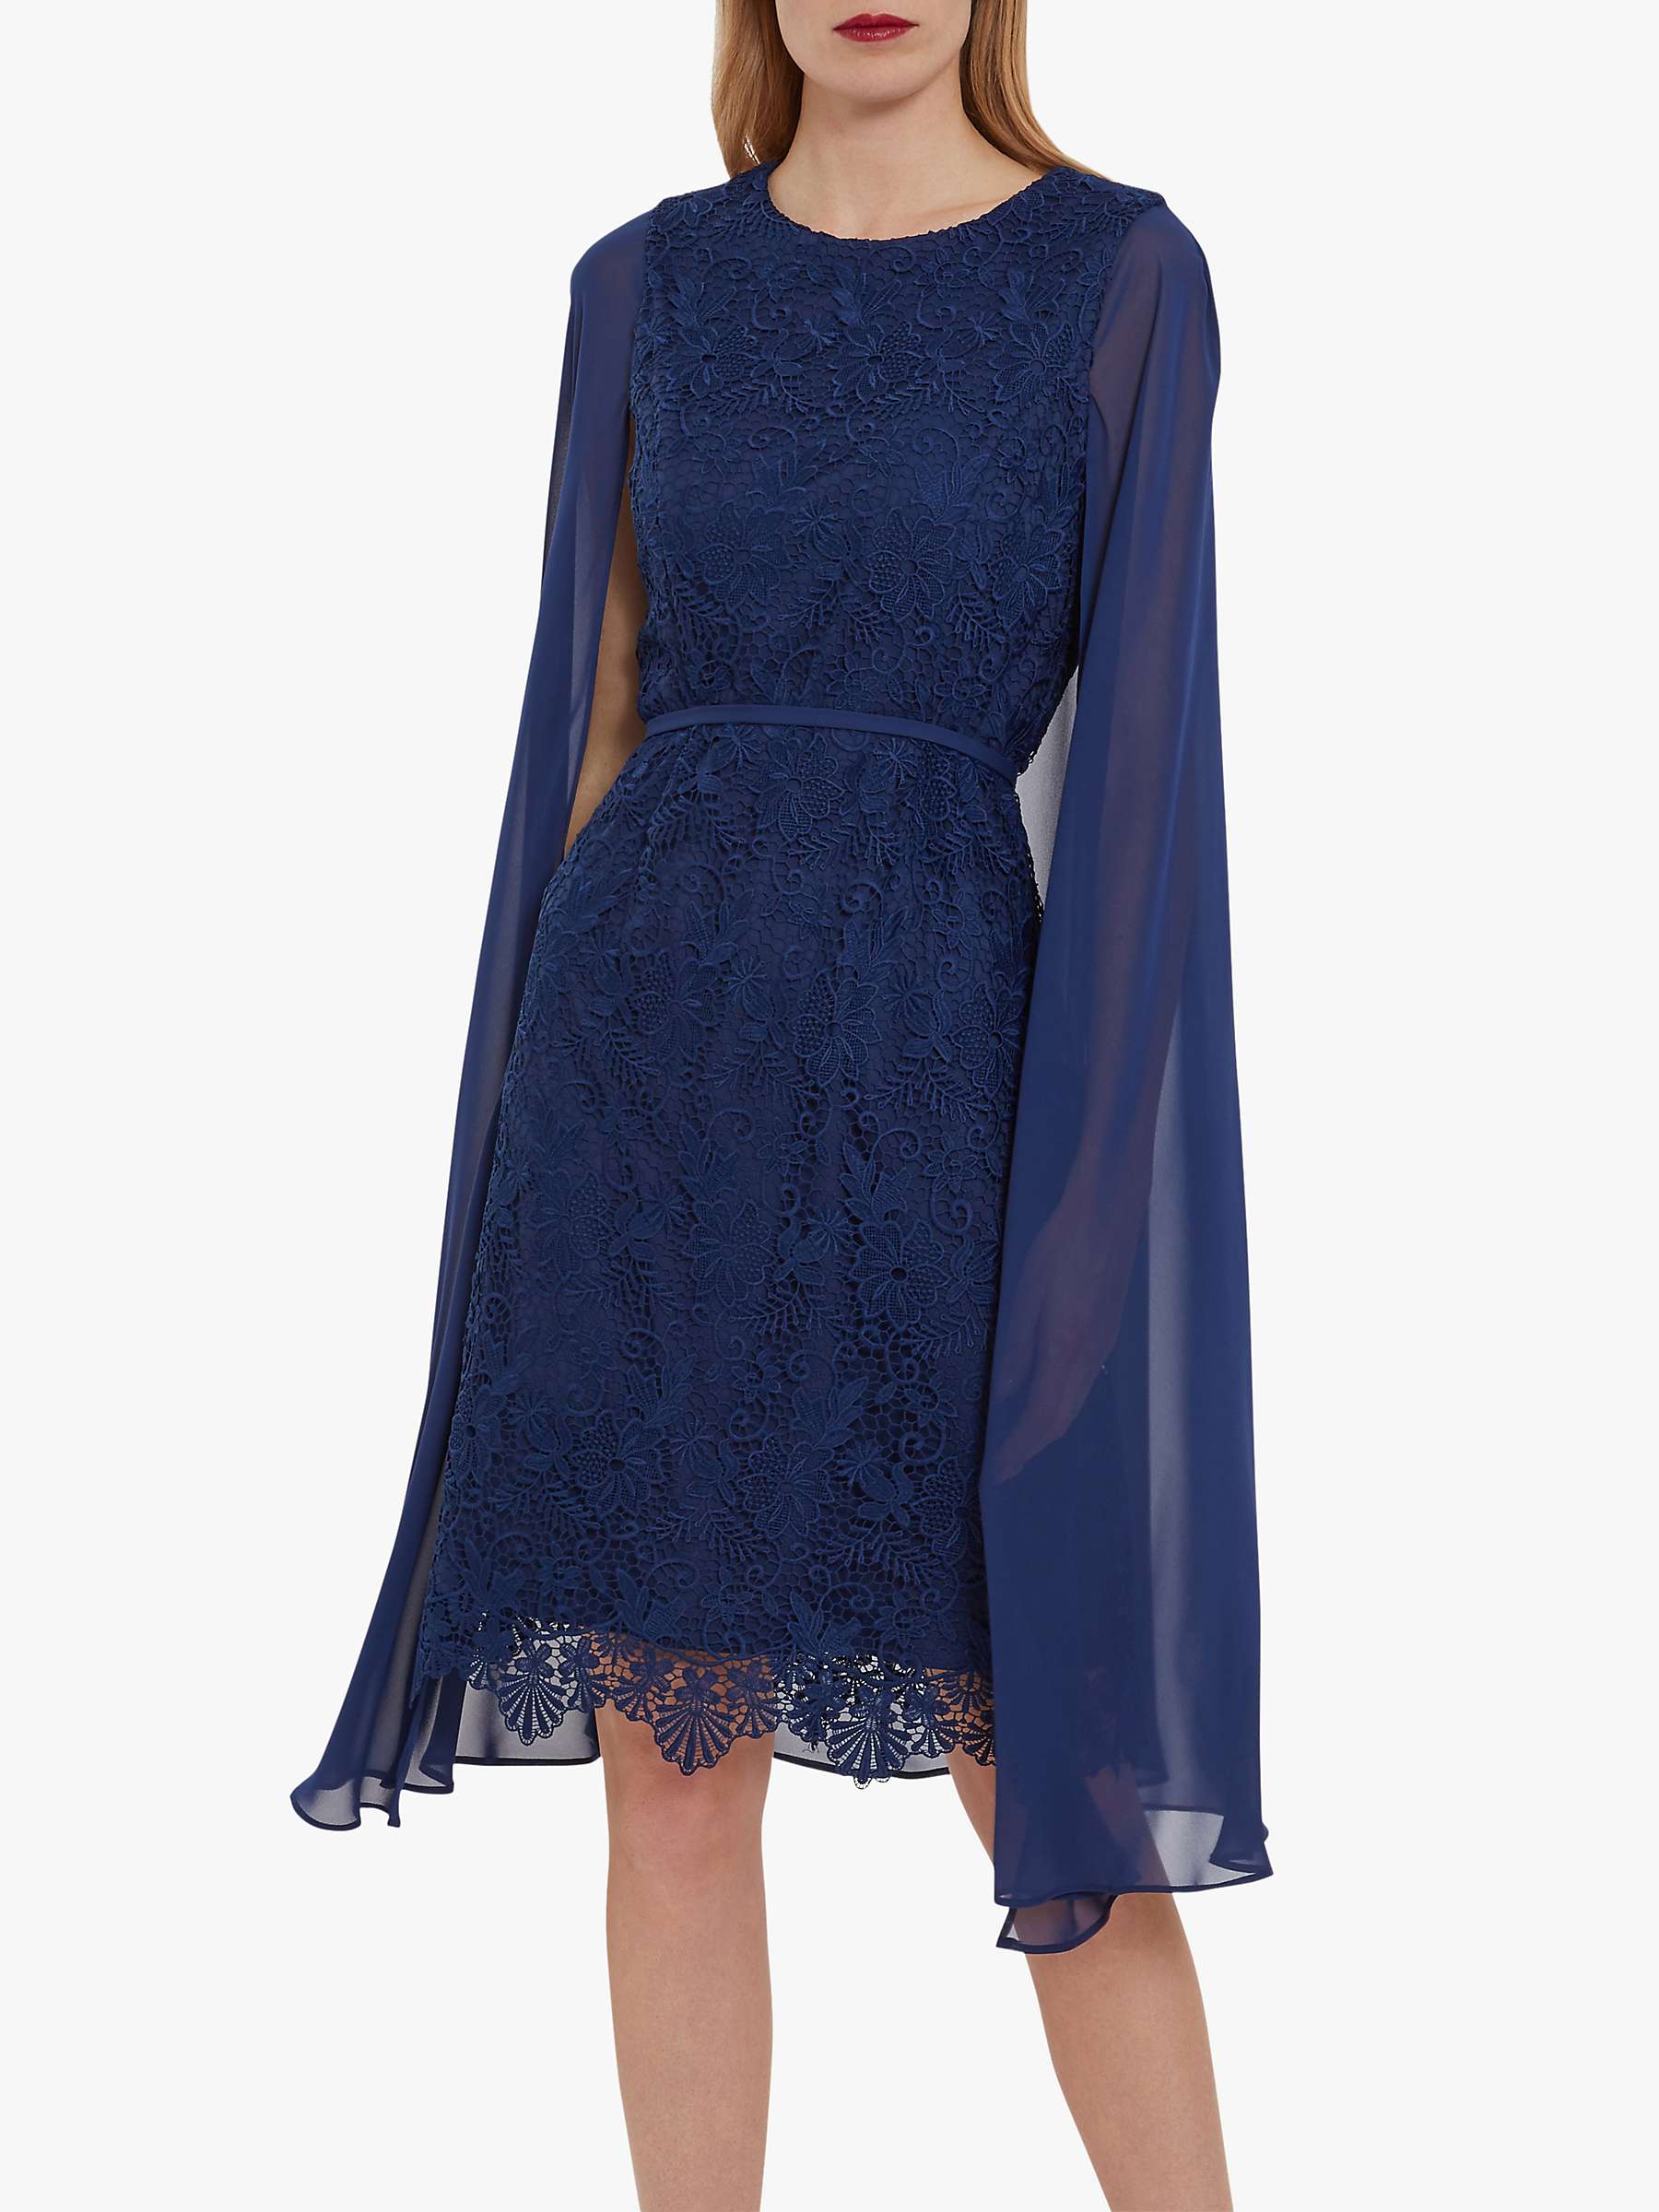 Buy Gina Bacconi Sansa Dress with Cape Online at johnlewis.com